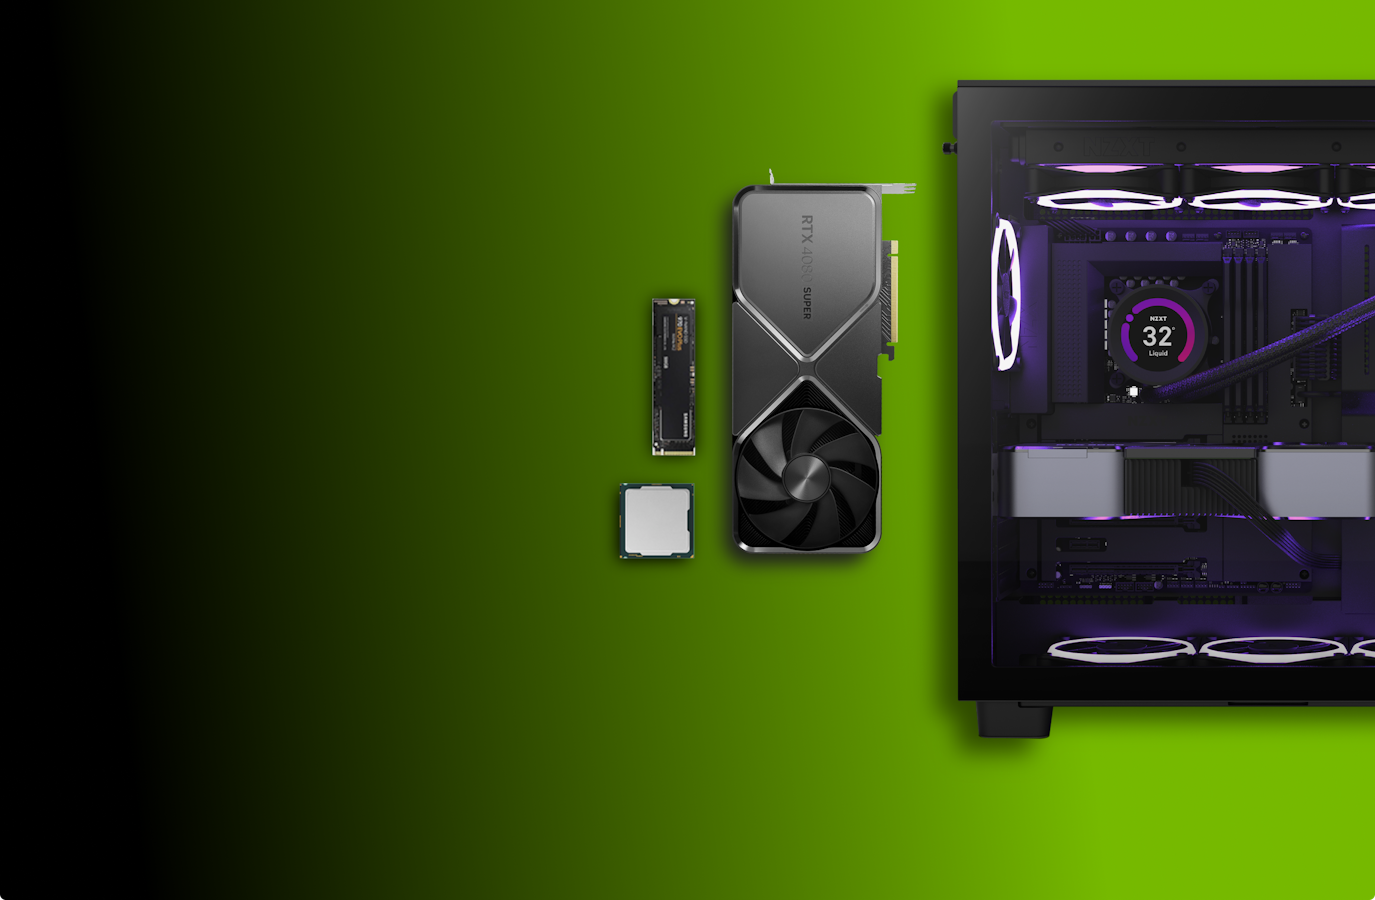 Nvidia Bkg - NZXT components